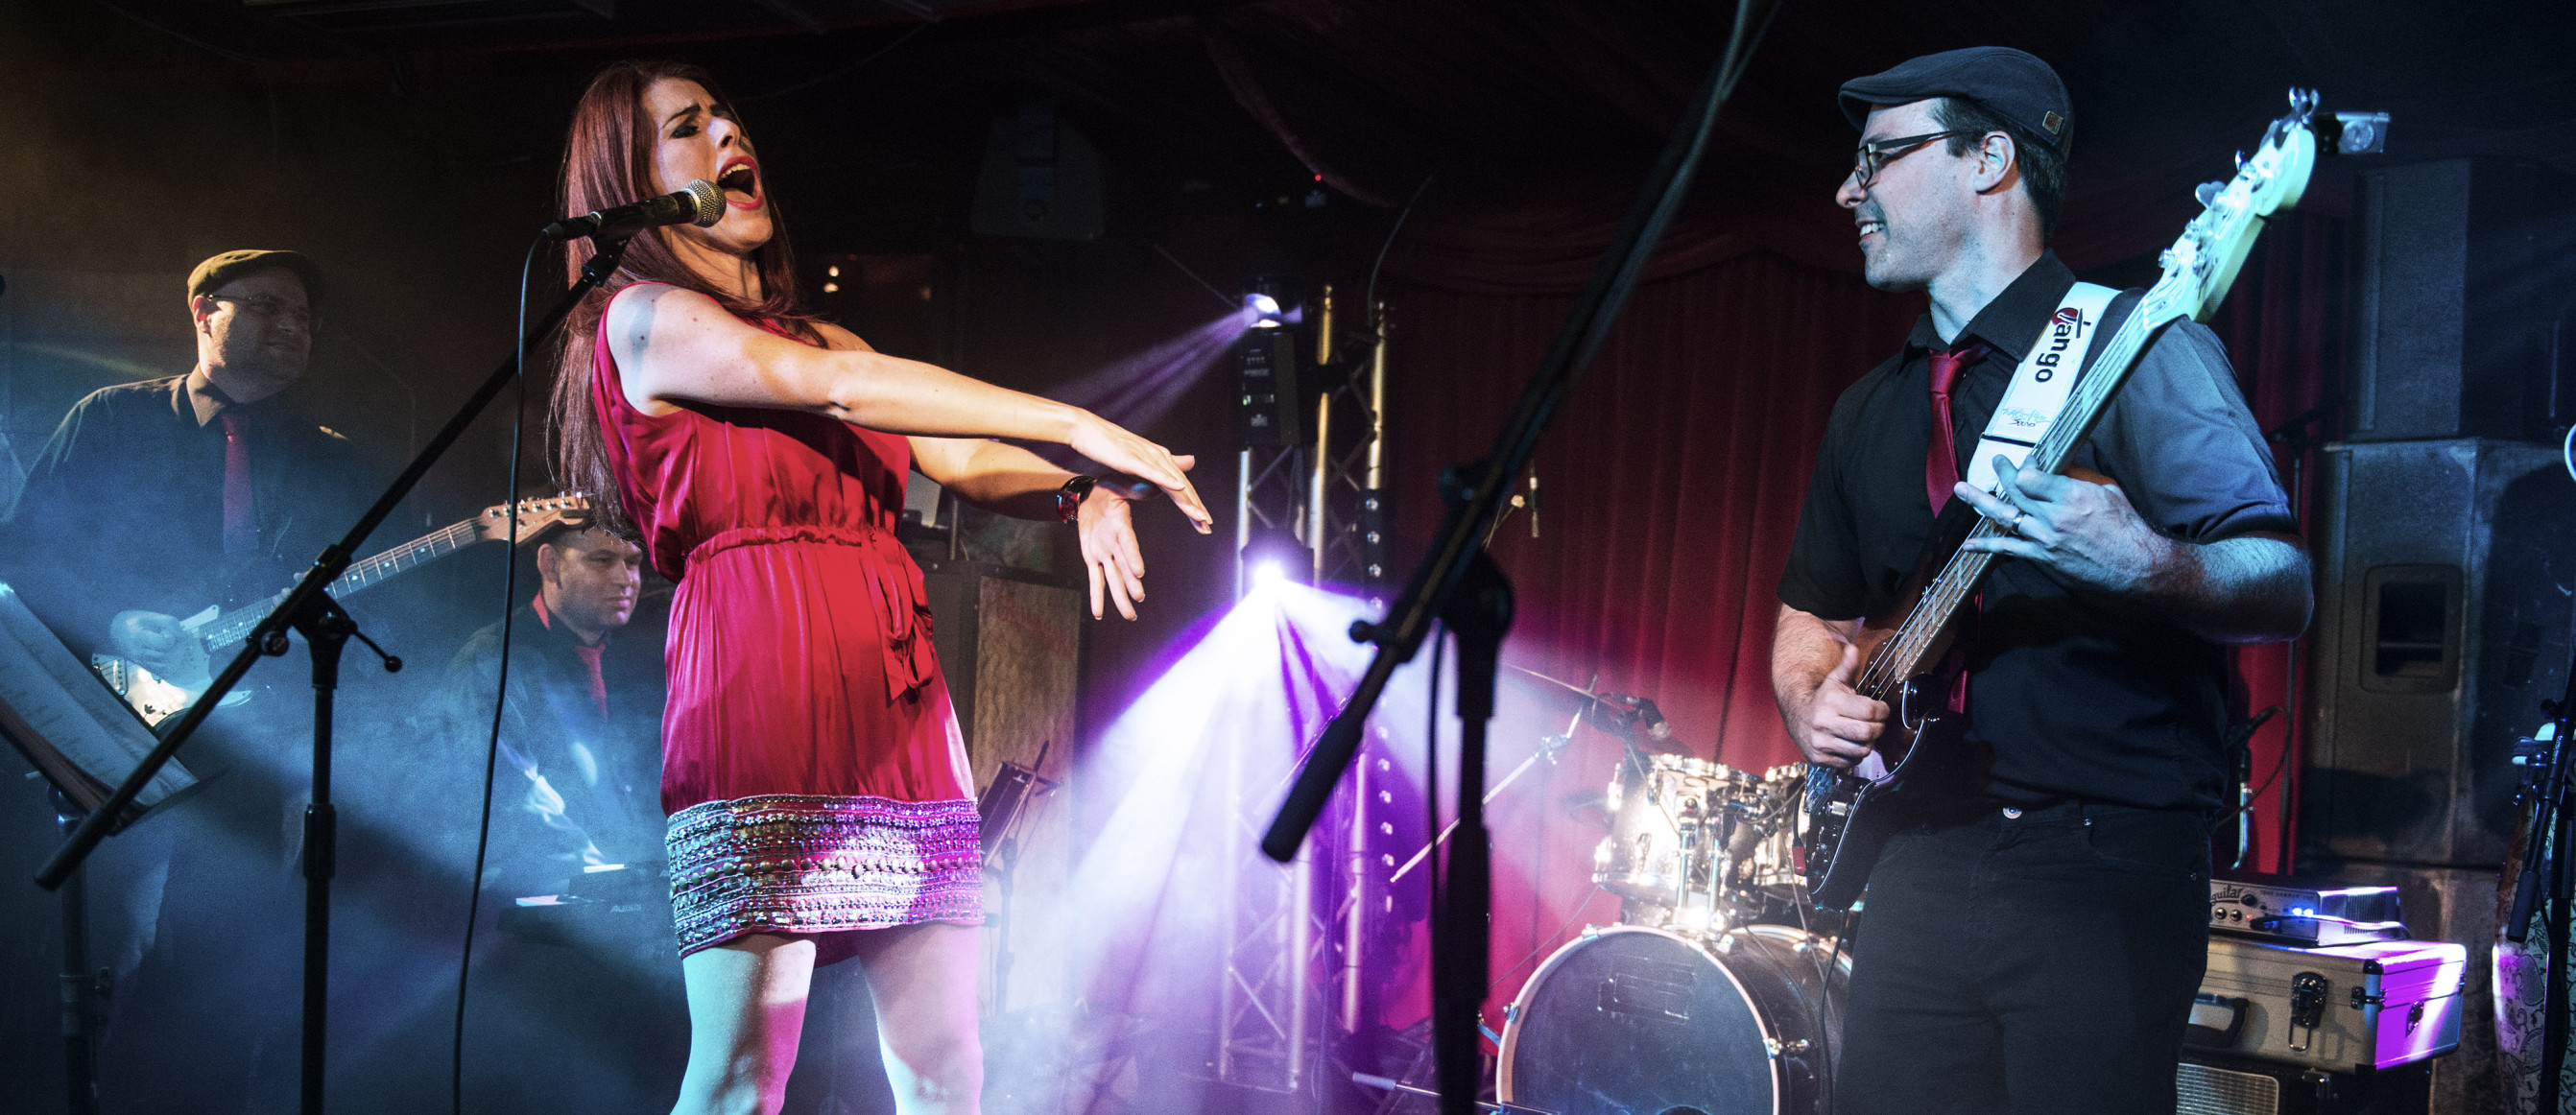 London Bands for Hire | Cover Bands | Weddings | Events - The Latin Soul Specials